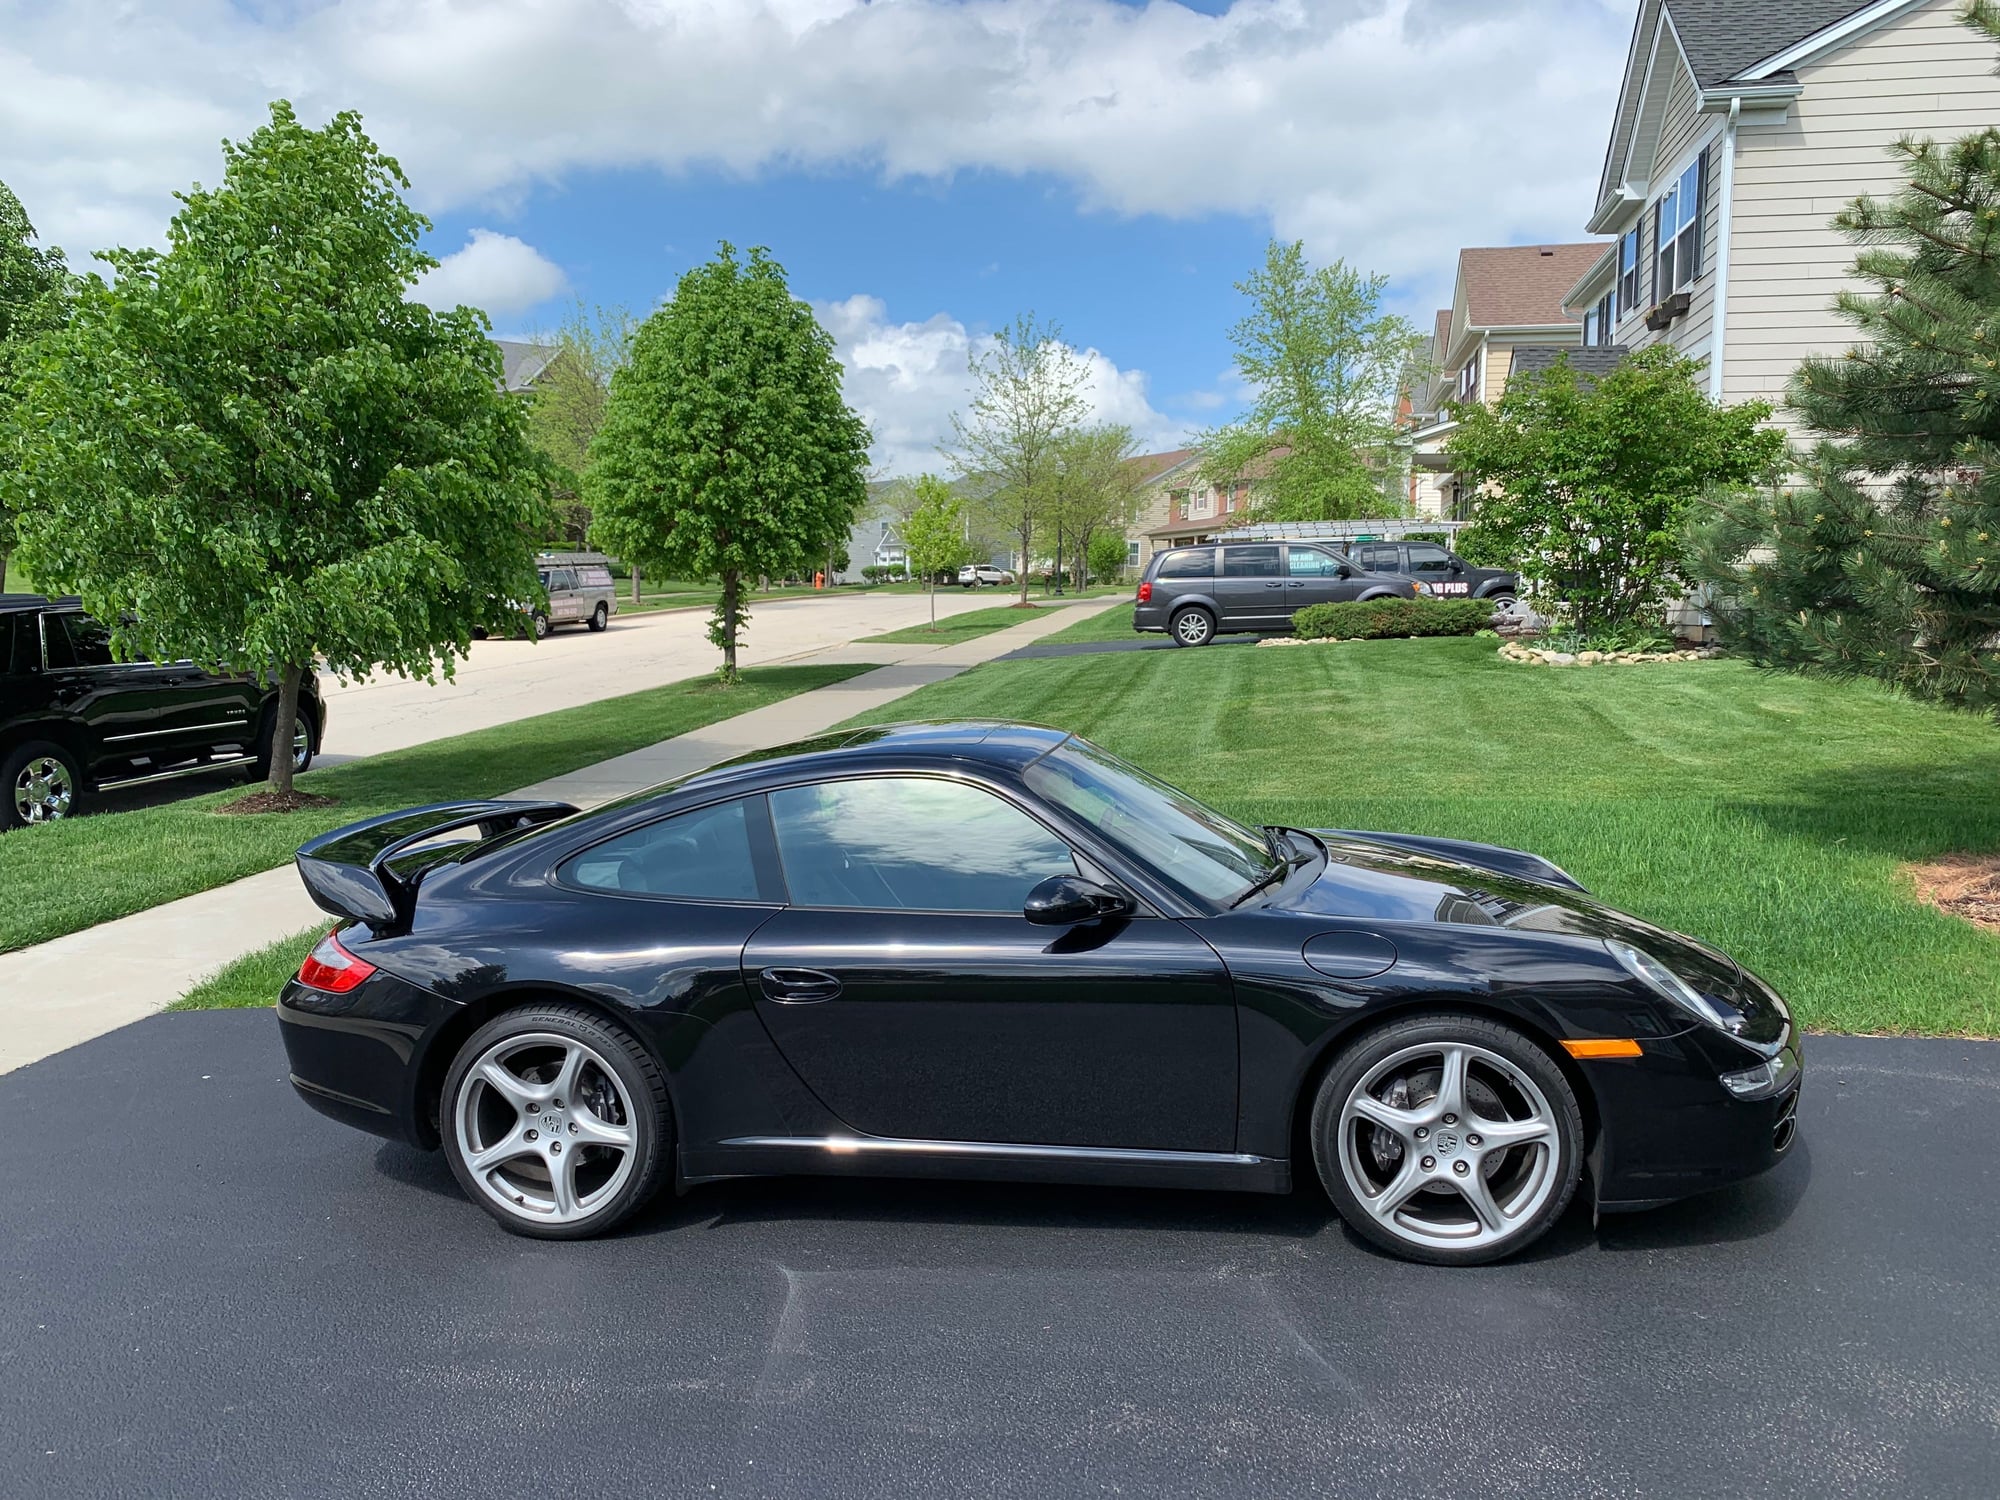 Exterior Body Parts - 997.1 GT2 Spoiler and Lid - Used - 2005 to 2012 Porsche 911 - Elgin, IL 60124, United States